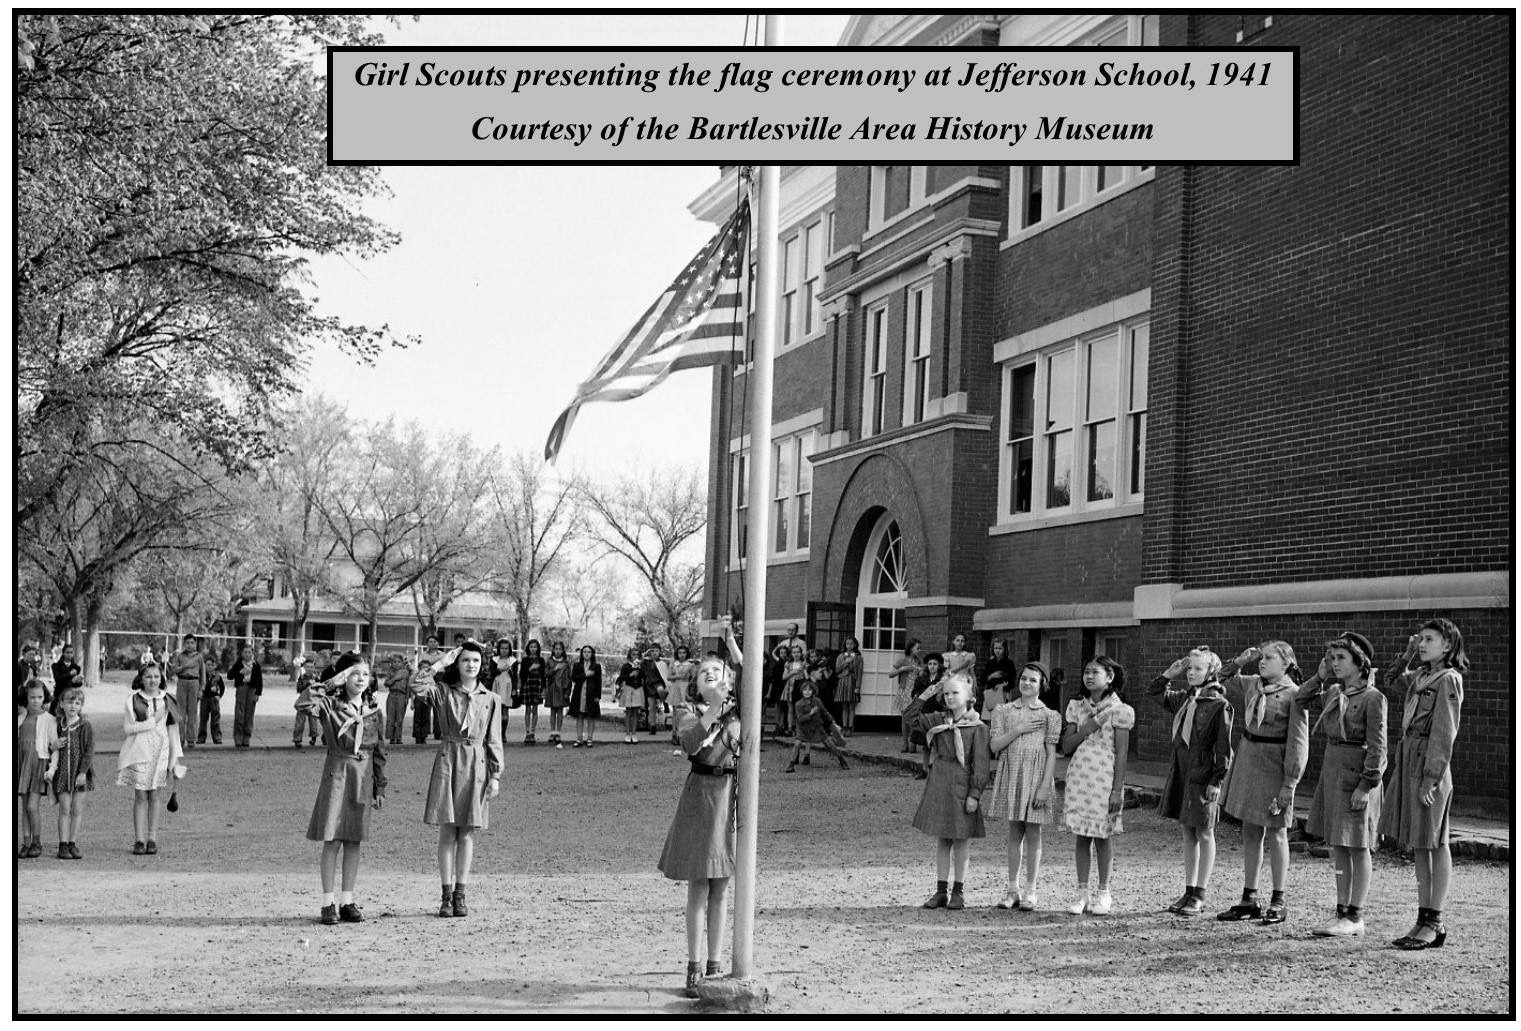 1941 Girl Scout Flag Ceremony